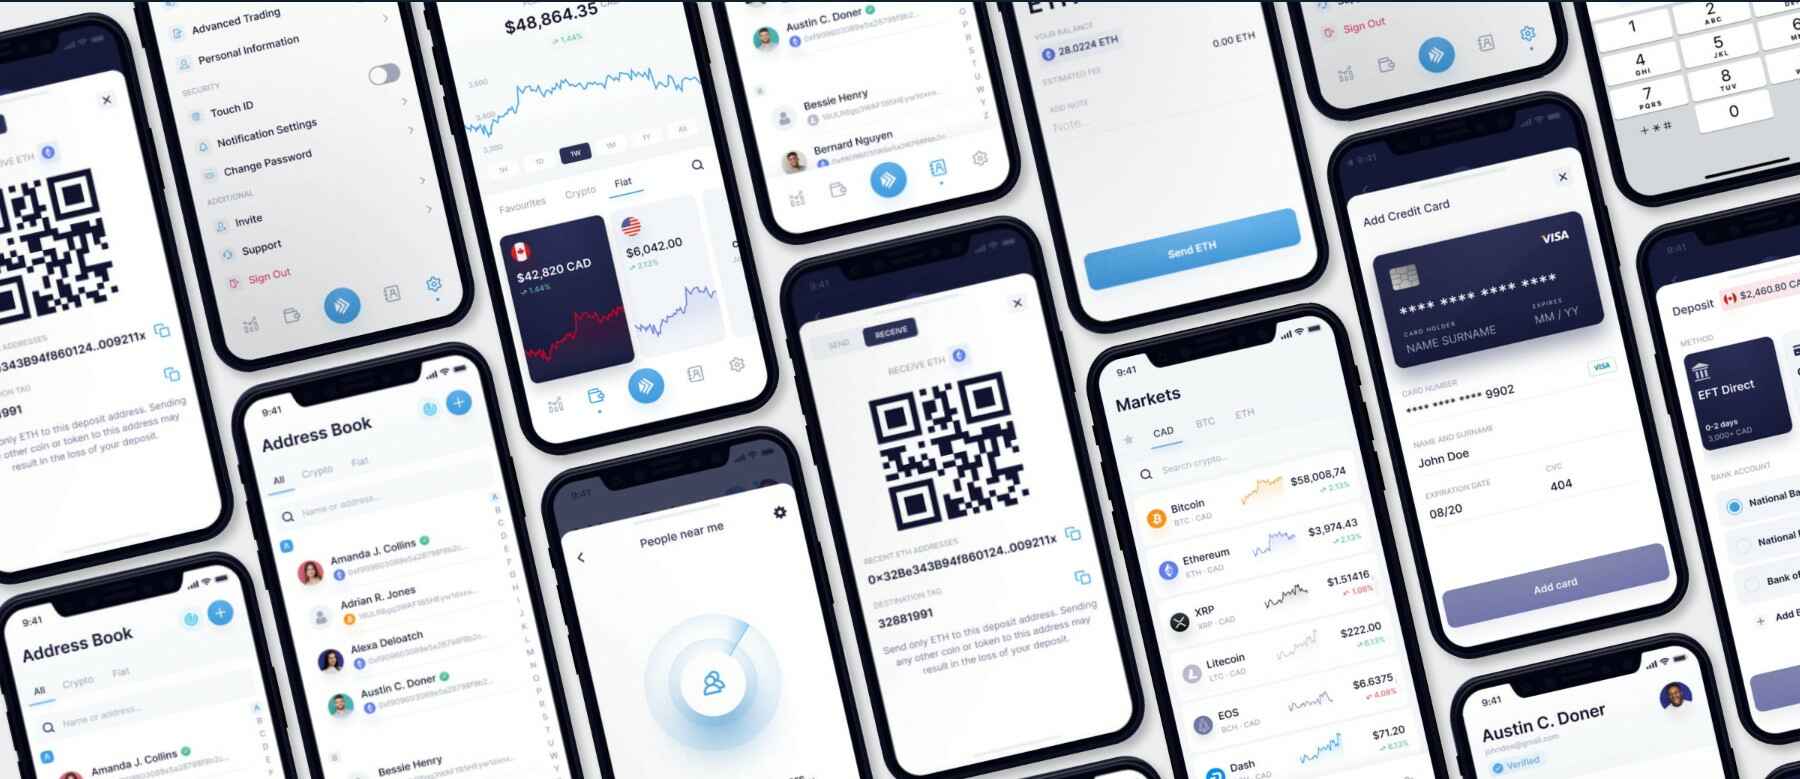 NDAX.io, the cross-platform cryptocurrency mobile app developed by WeSoftYou